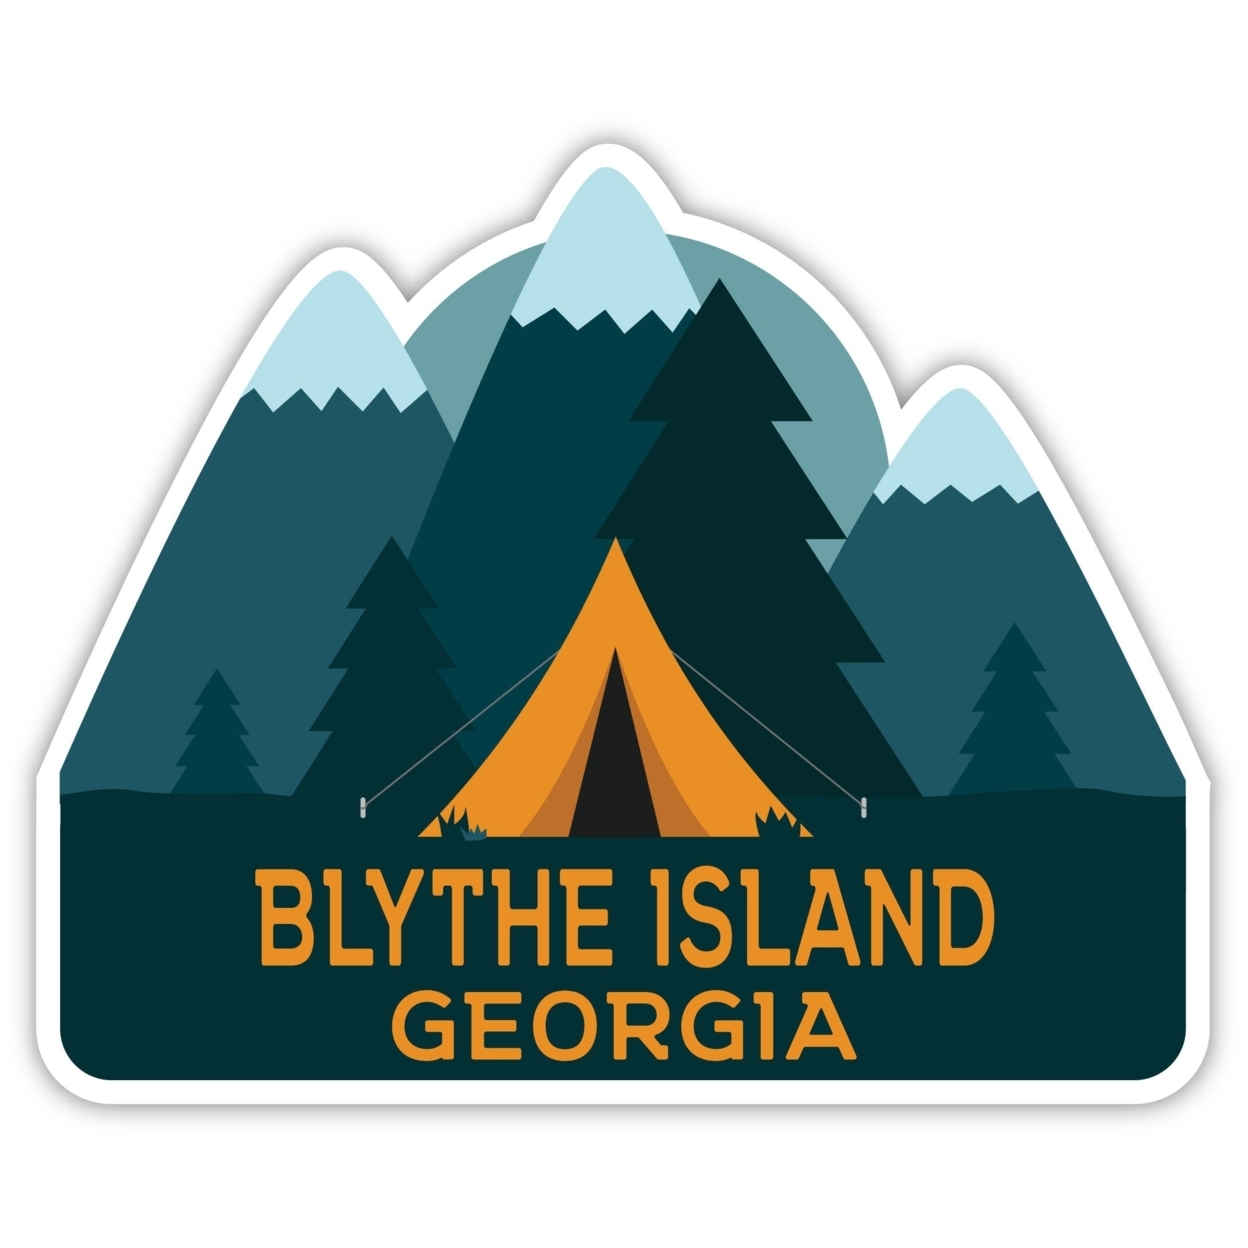 Blythe Island Georgia Souvenir Decorative Stickers (Choose Theme And Size) - 4-Pack, 6-Inch, Tent